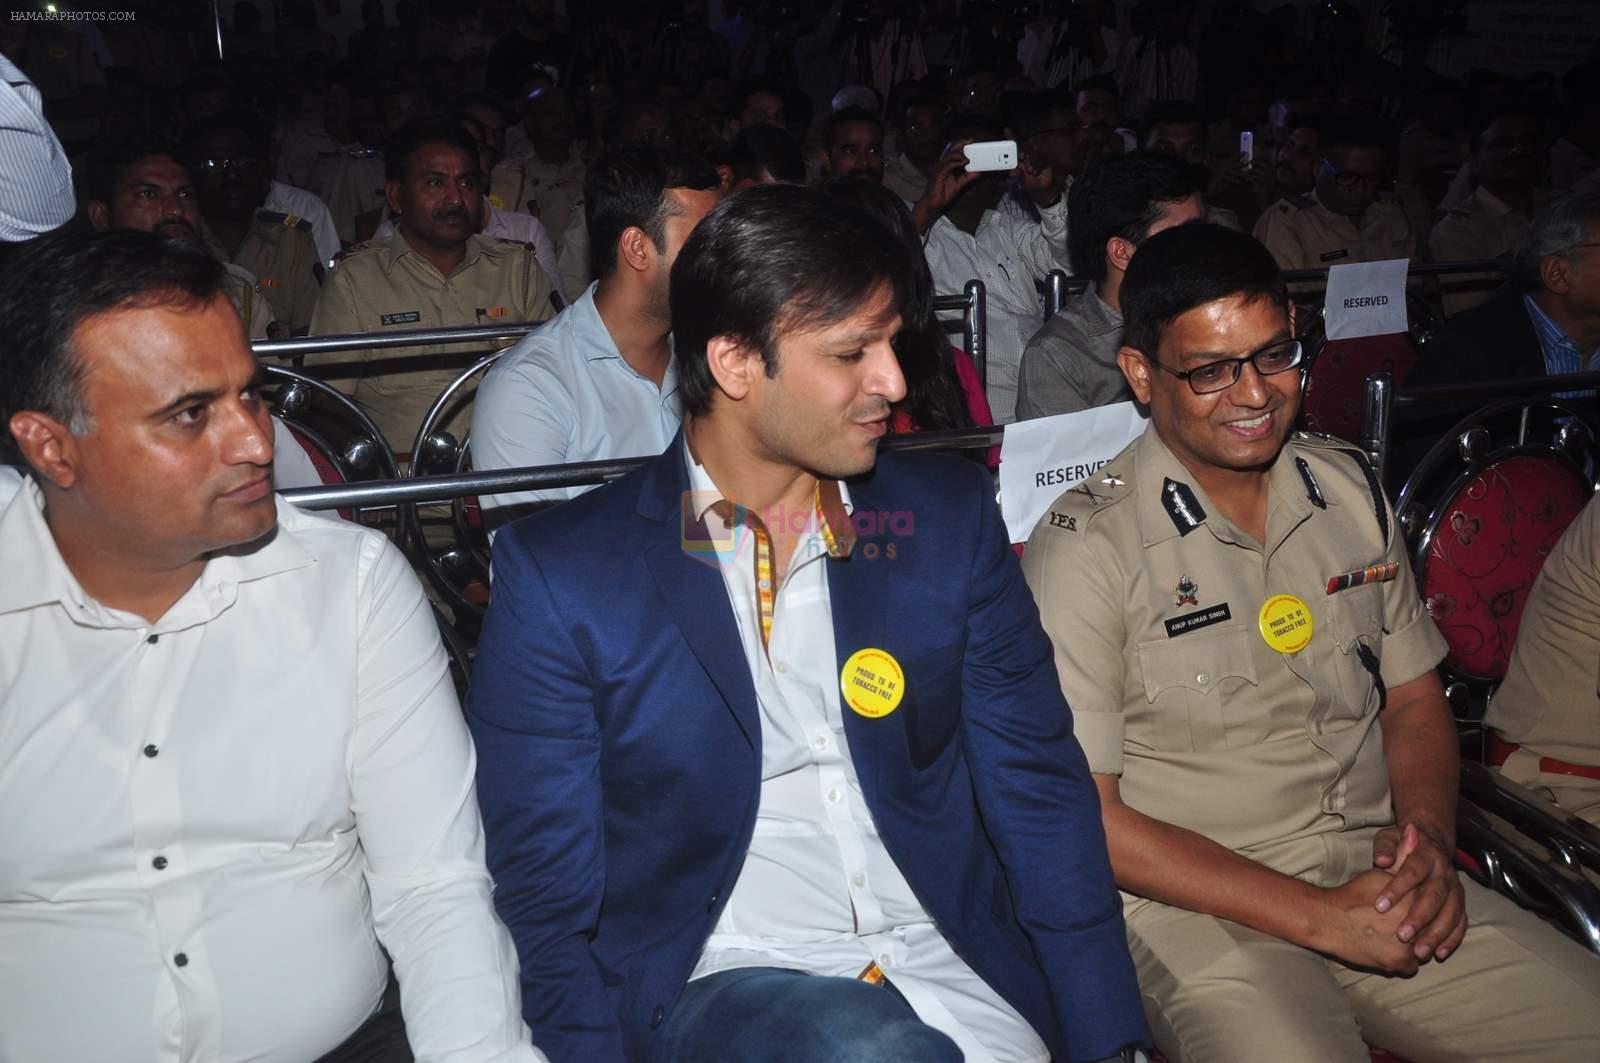 Vivek Oberoi at anti cancer event in Mumbai on 22nd May 2015